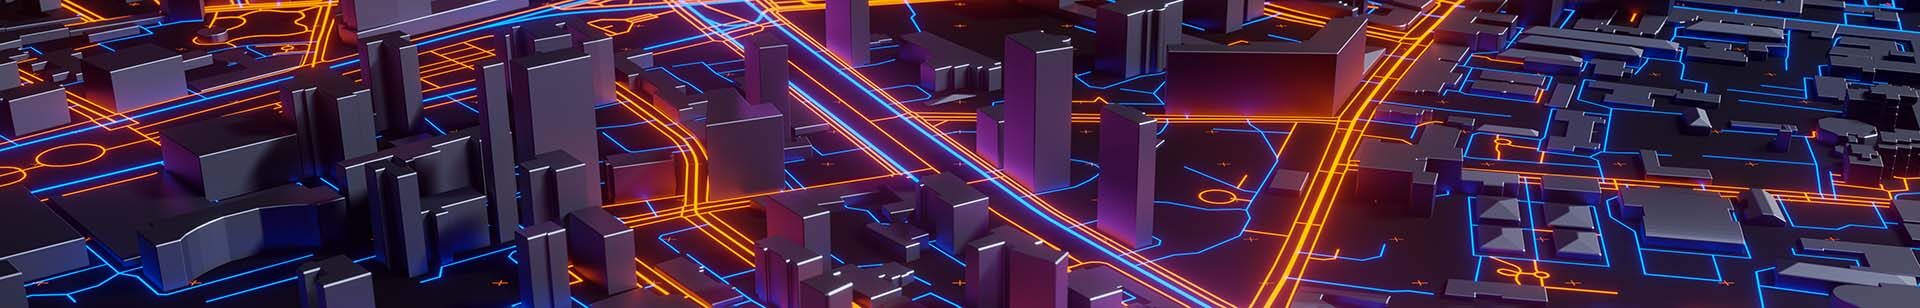 Techno panorama/landscape of an urban and modern city with light trails of orange and purple colours on highways